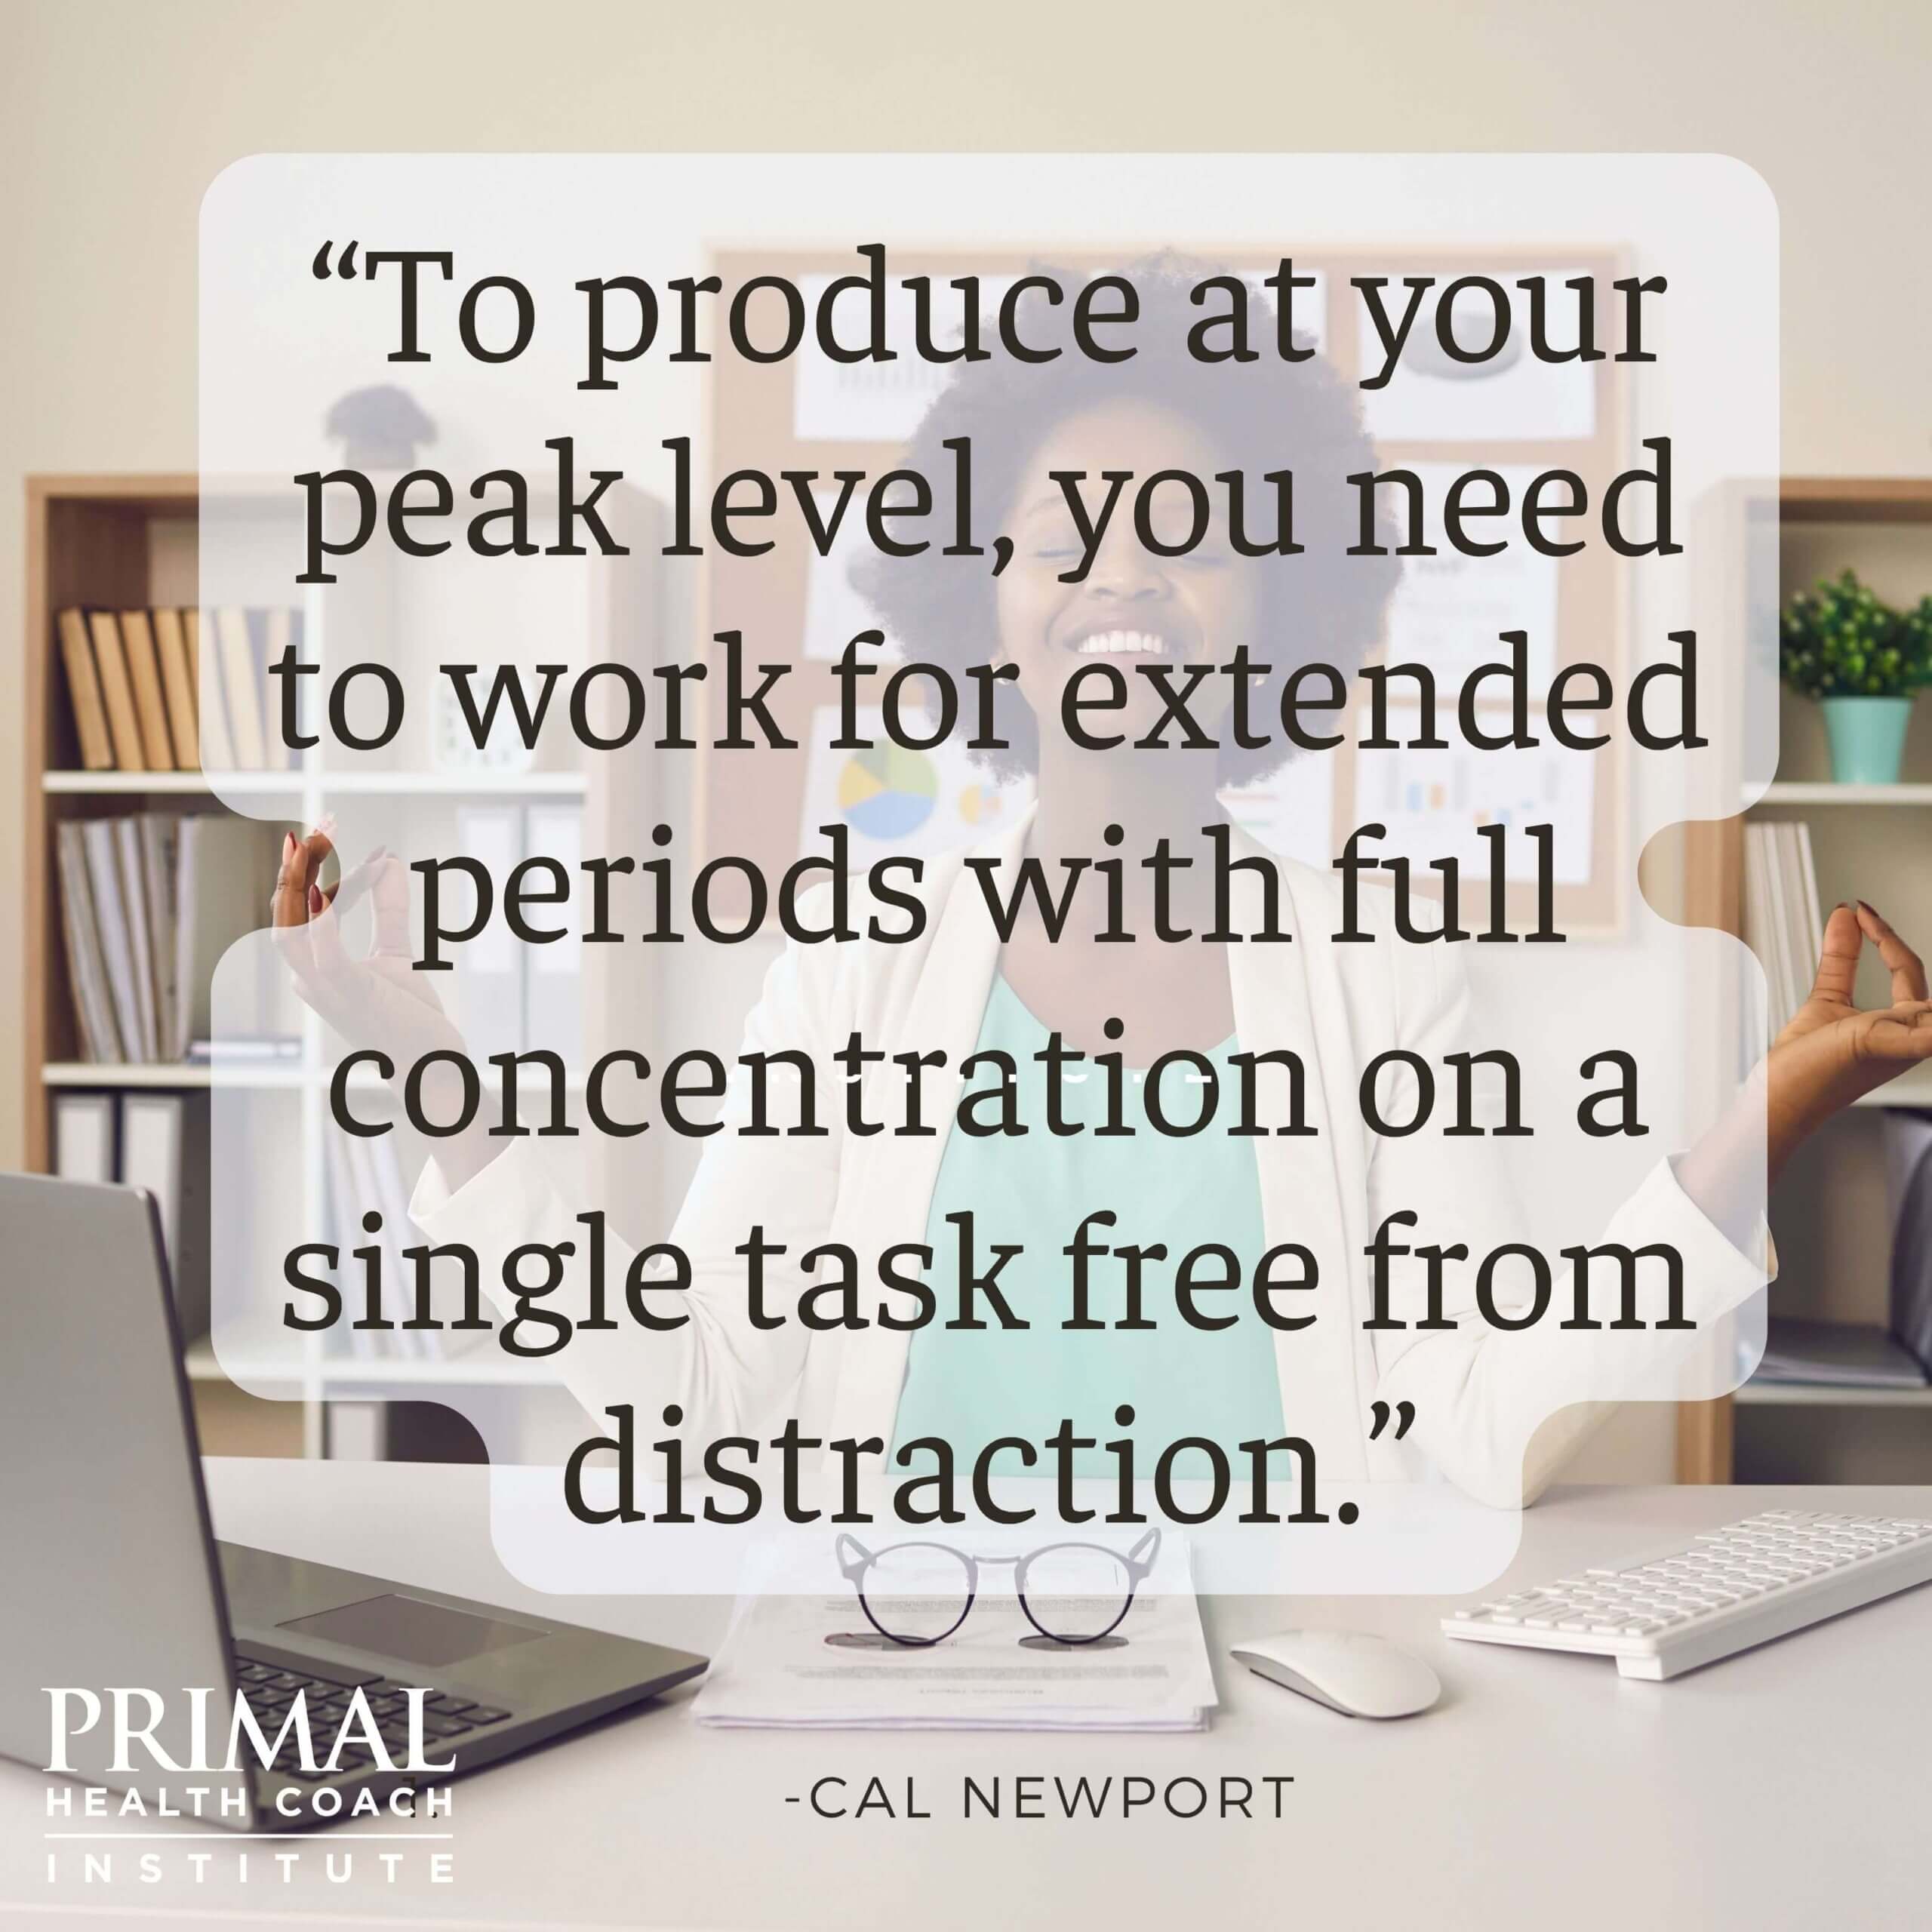 “To produce at your peak level, you need to work for extended periods with full concentration on a single task free from distraction.” - Cal Newport